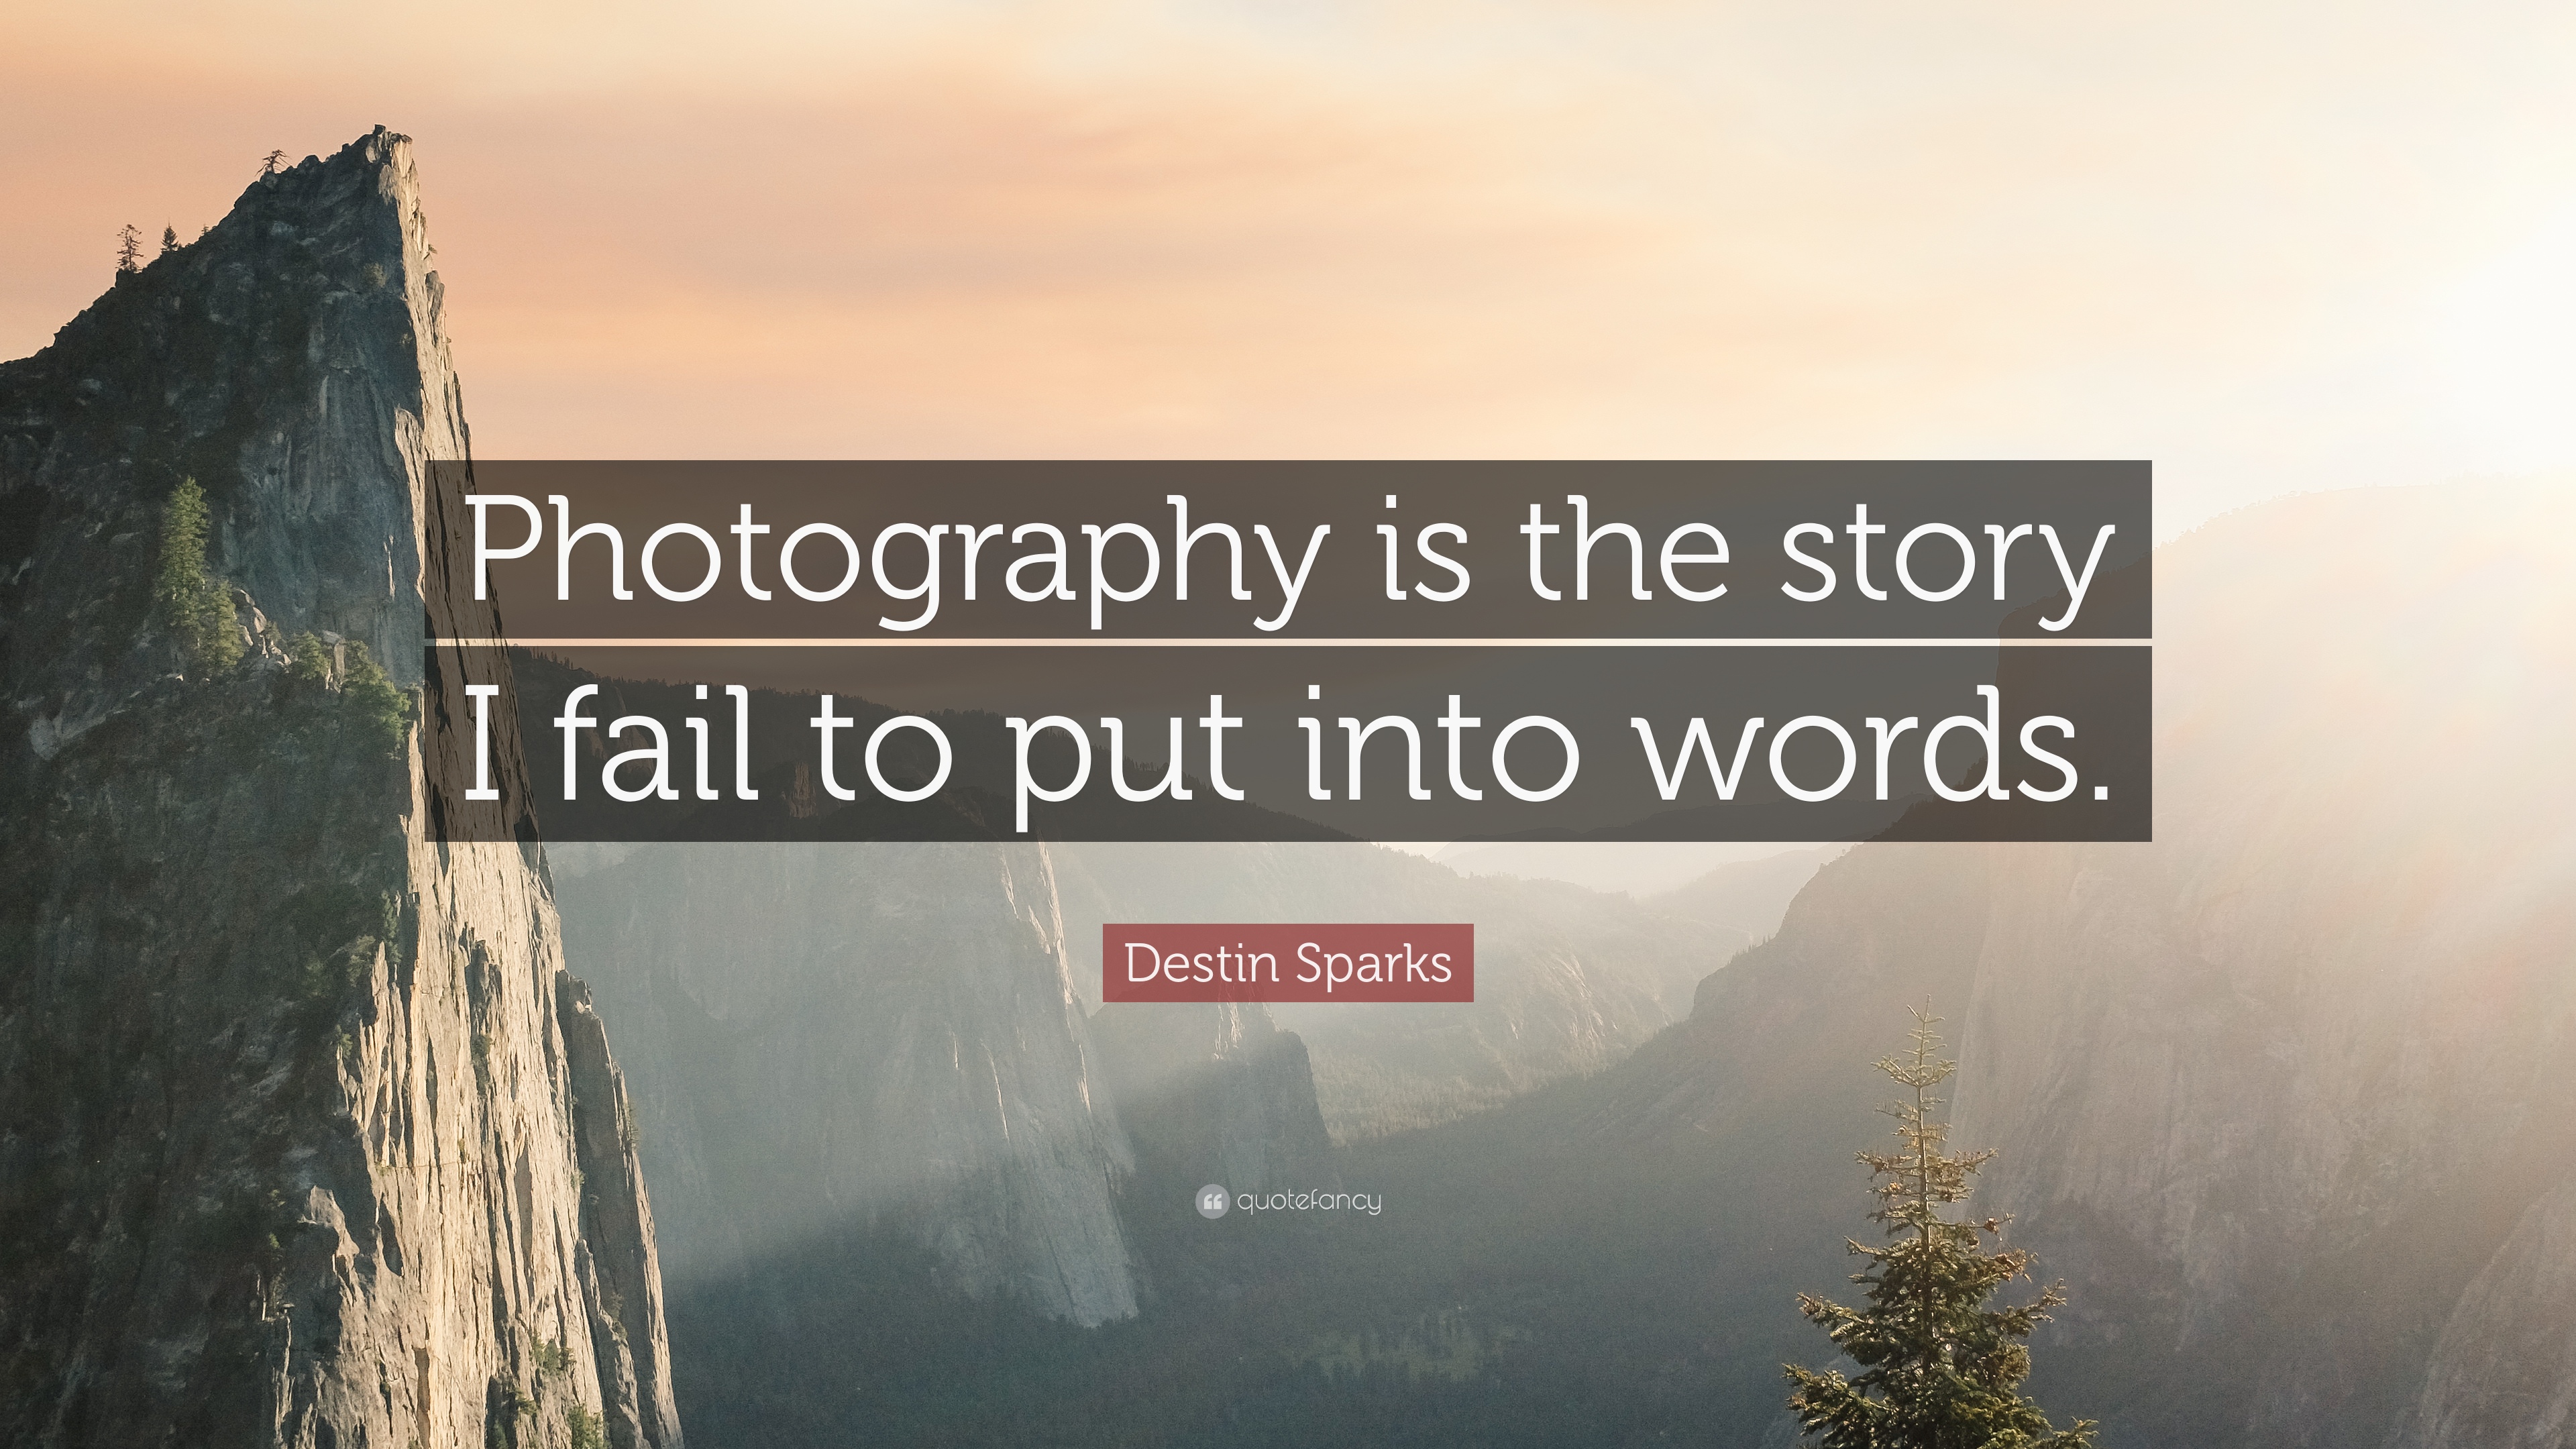 graphy is the story I fail to put into words Destin Sparks